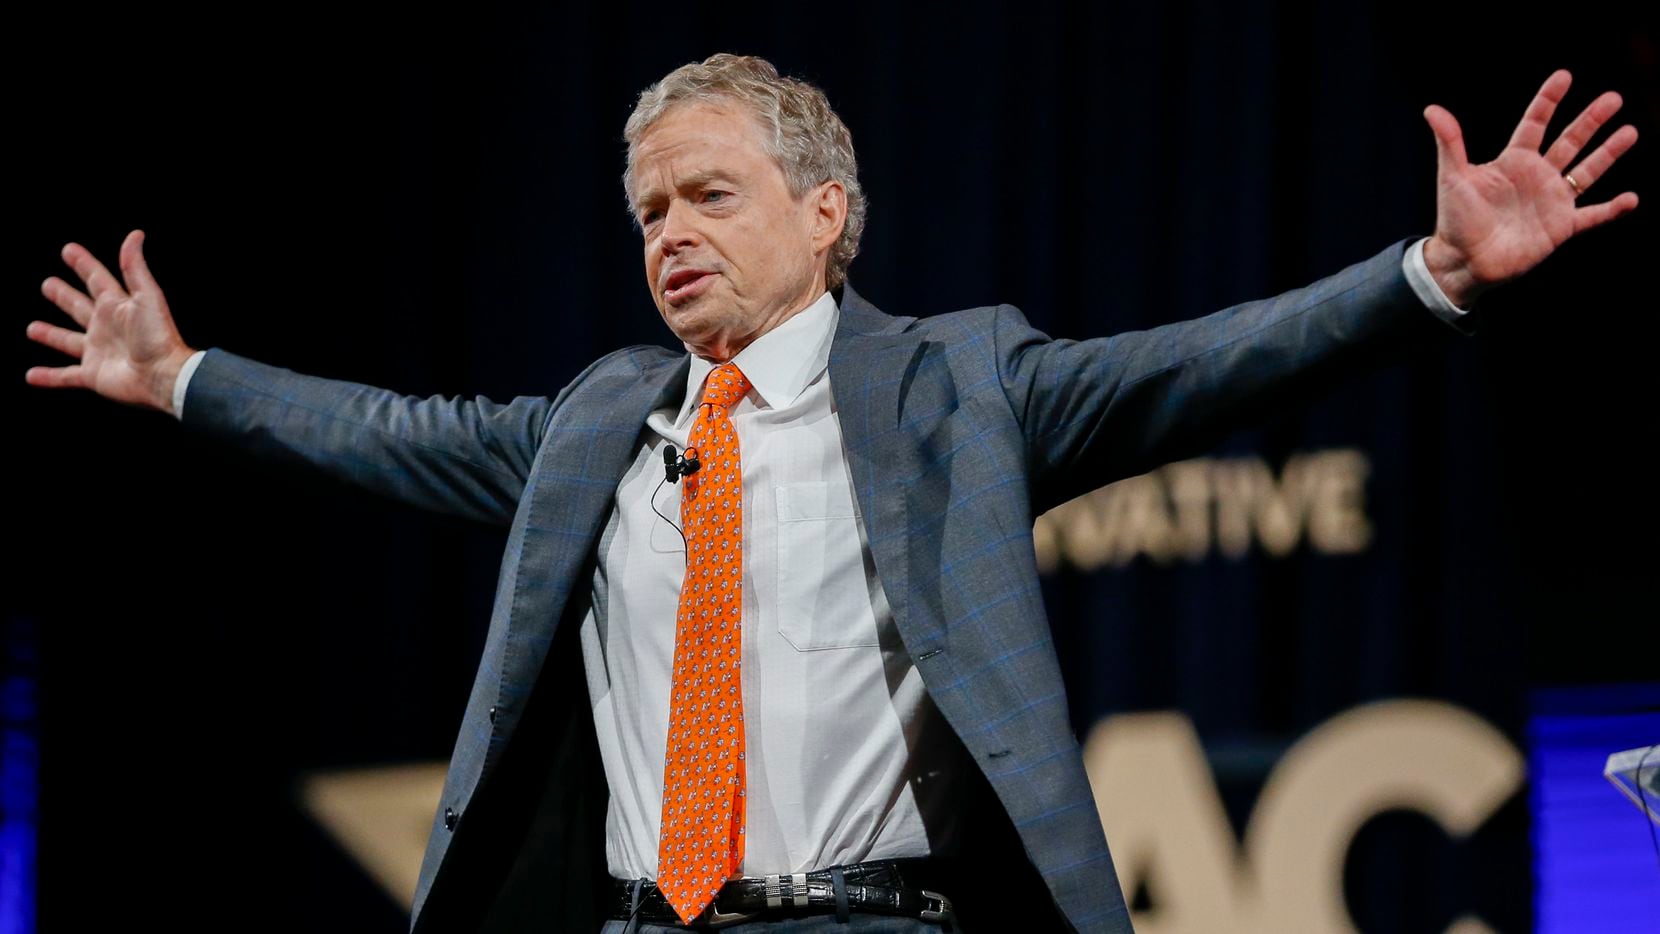 Former Texas state Sen. Don Huffines waves to the crowd after speaking at the Conservative Political Action Conference on Saturday, July 10, 2021, in Dallas. (Elias Valverde II/The Dallas Morning News)